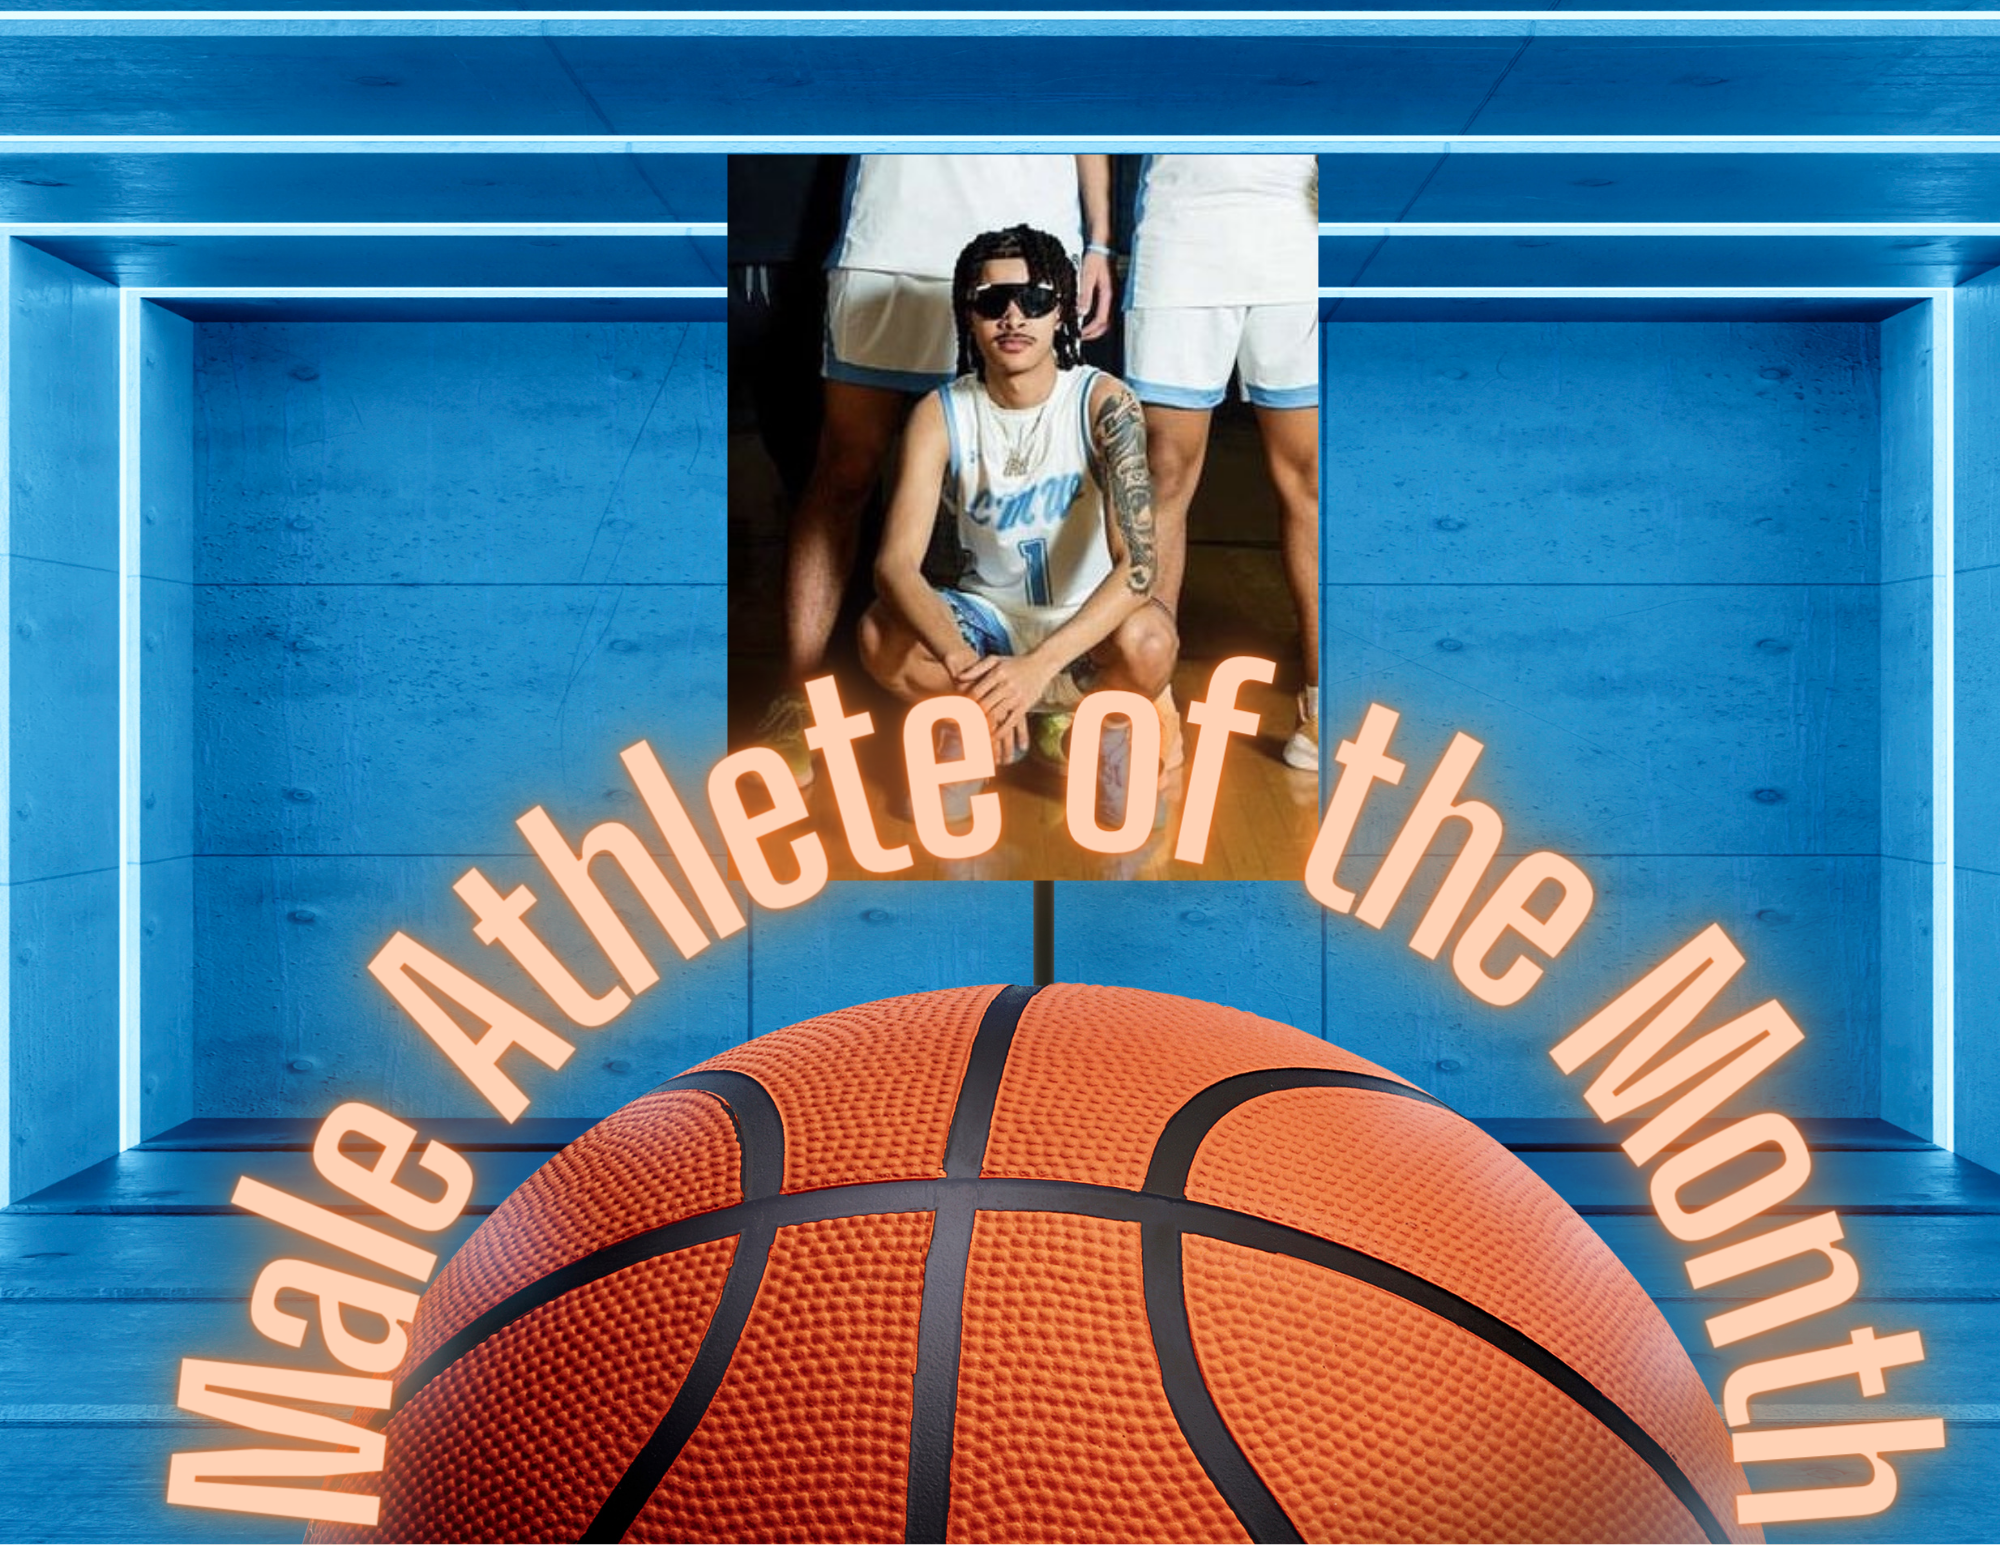 Male Athlete of the Month